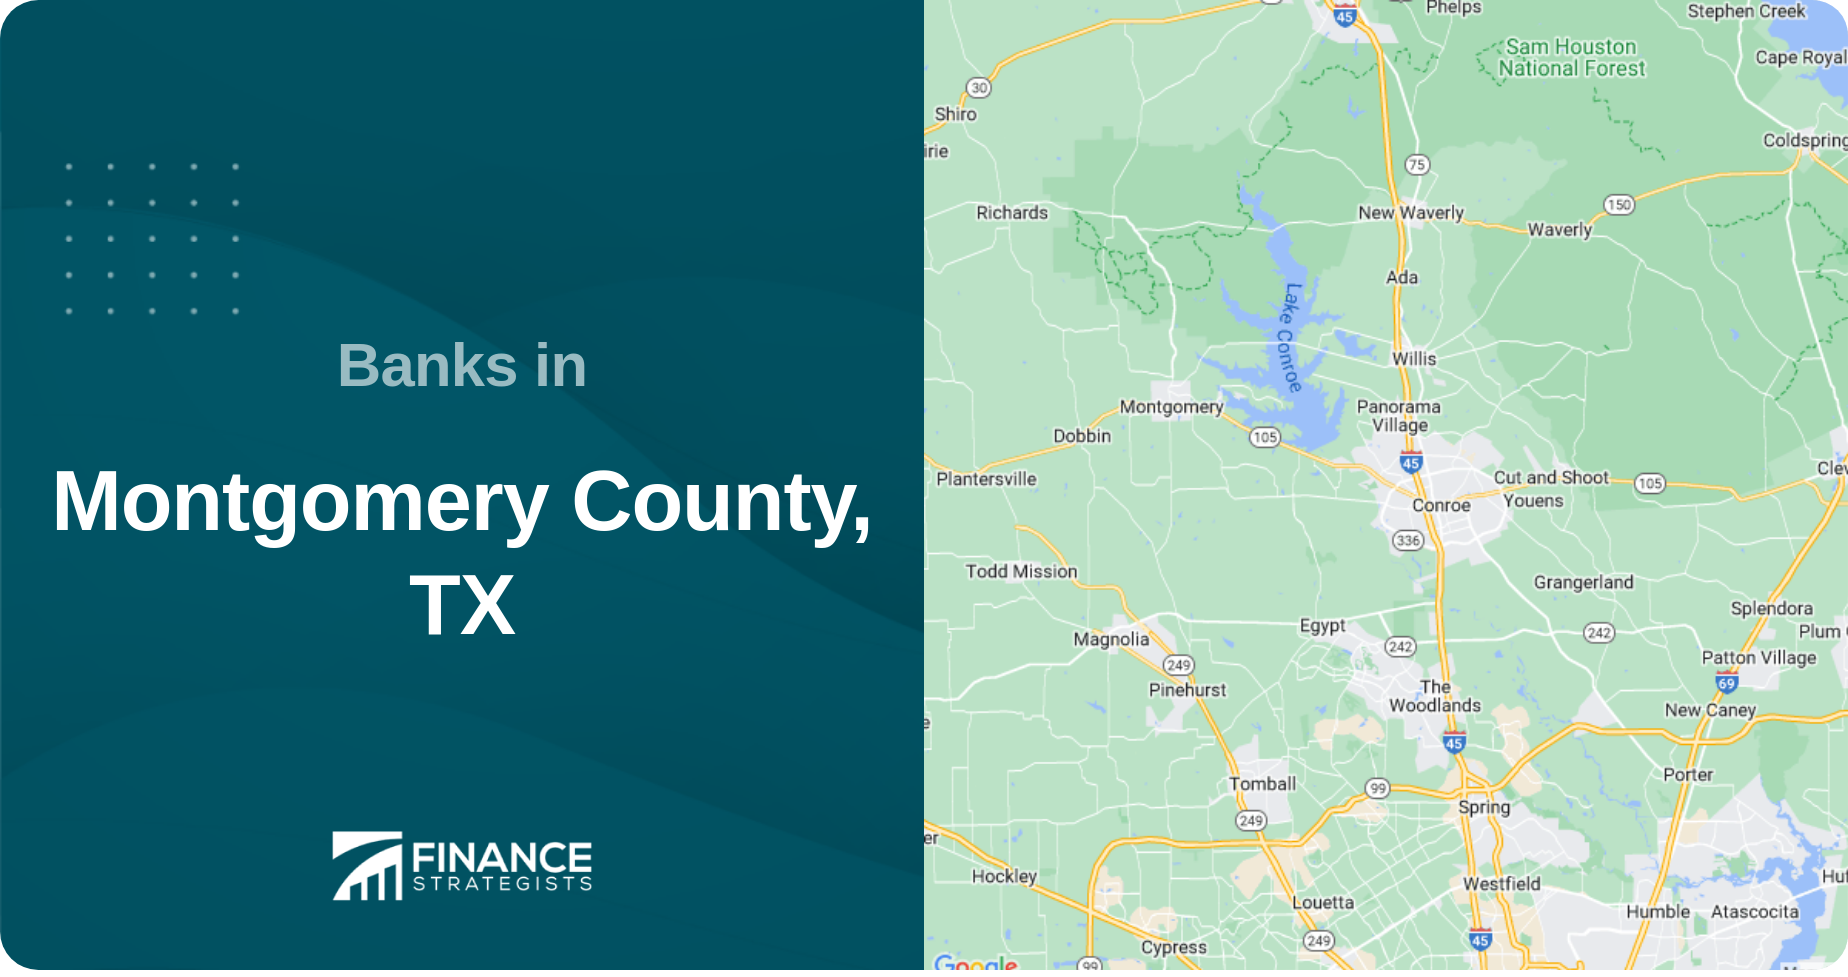 Banks in Montgomery County, TX